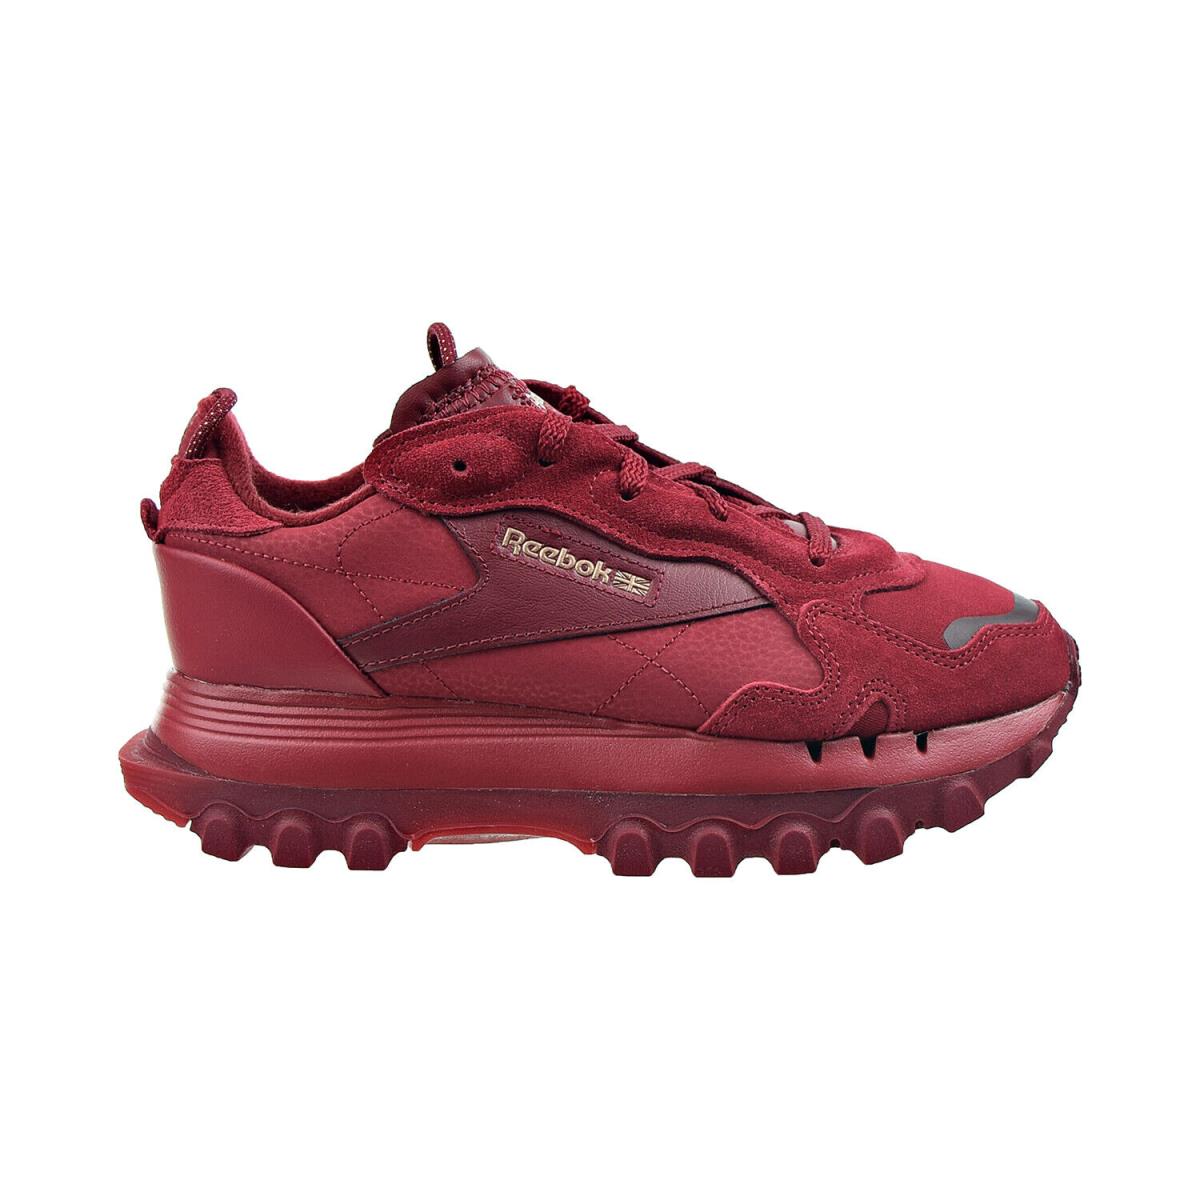 Reebok Cardi B Classic Leather Women`s Shoes H00683 Red Burgundy Sneakers US 7.5 - Triathlon Red / Classic Burgundy / Golden Bronze